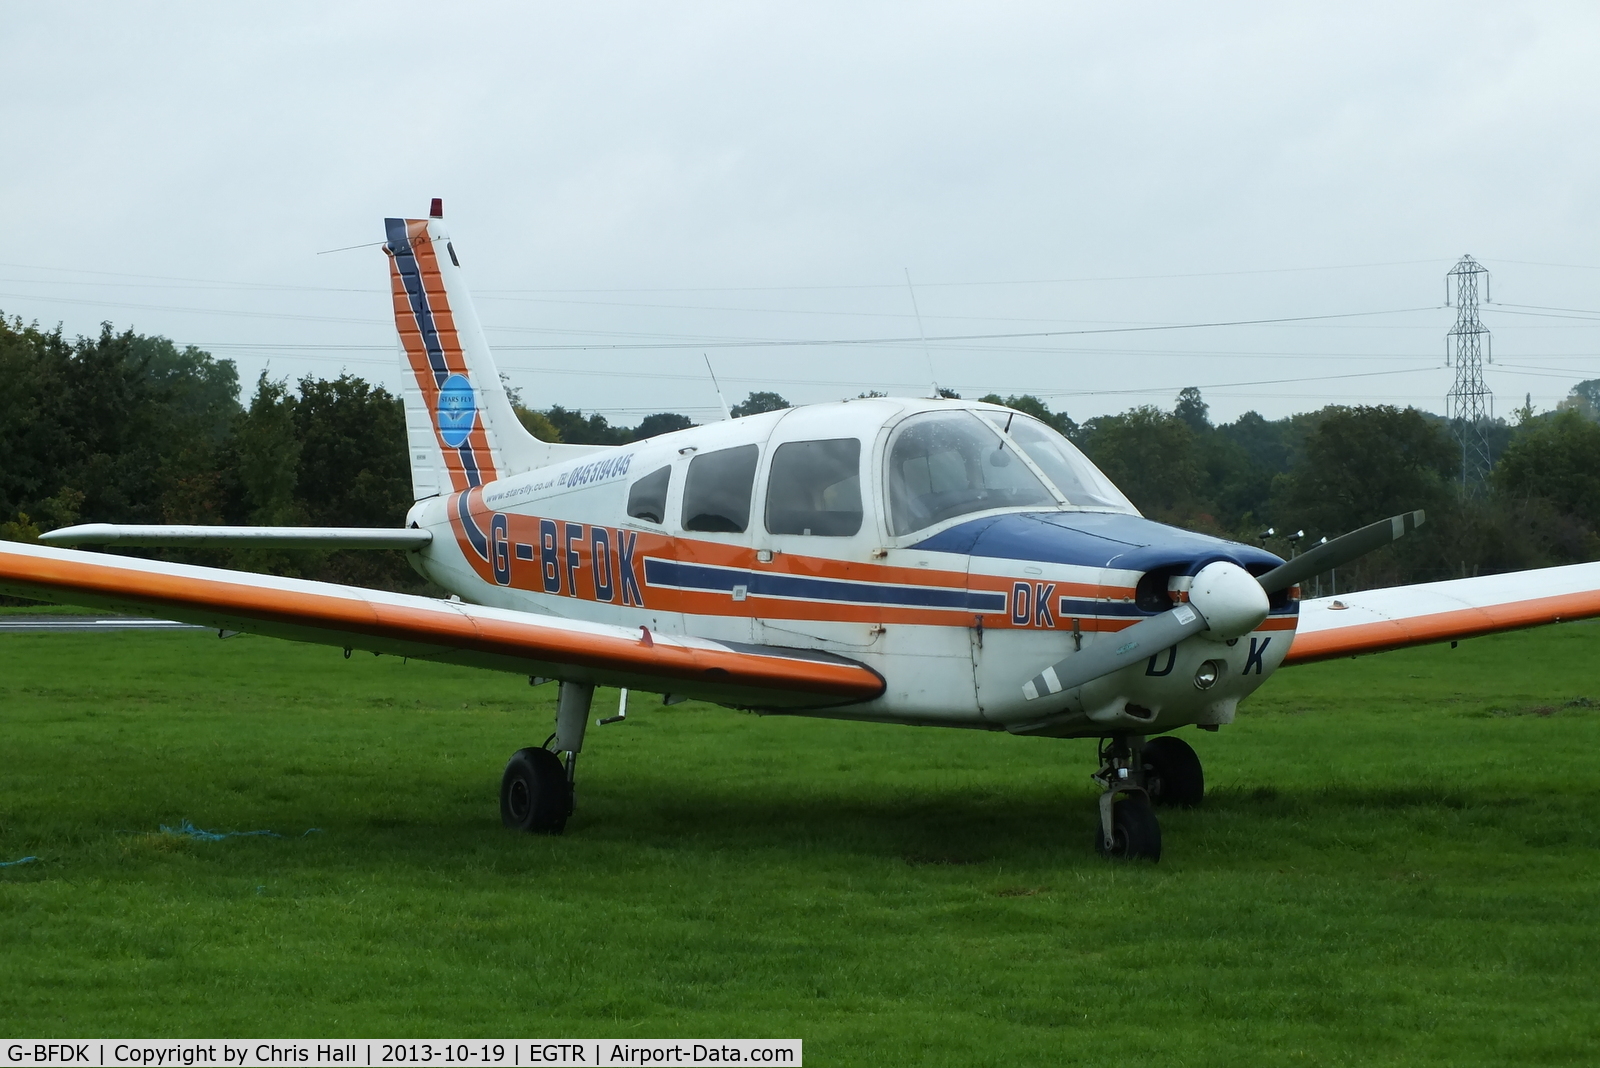 G-BFDK, 1977 Piper PA-28-161 Cherokee Warrior II C/N 28-7816010, parked at Elstree